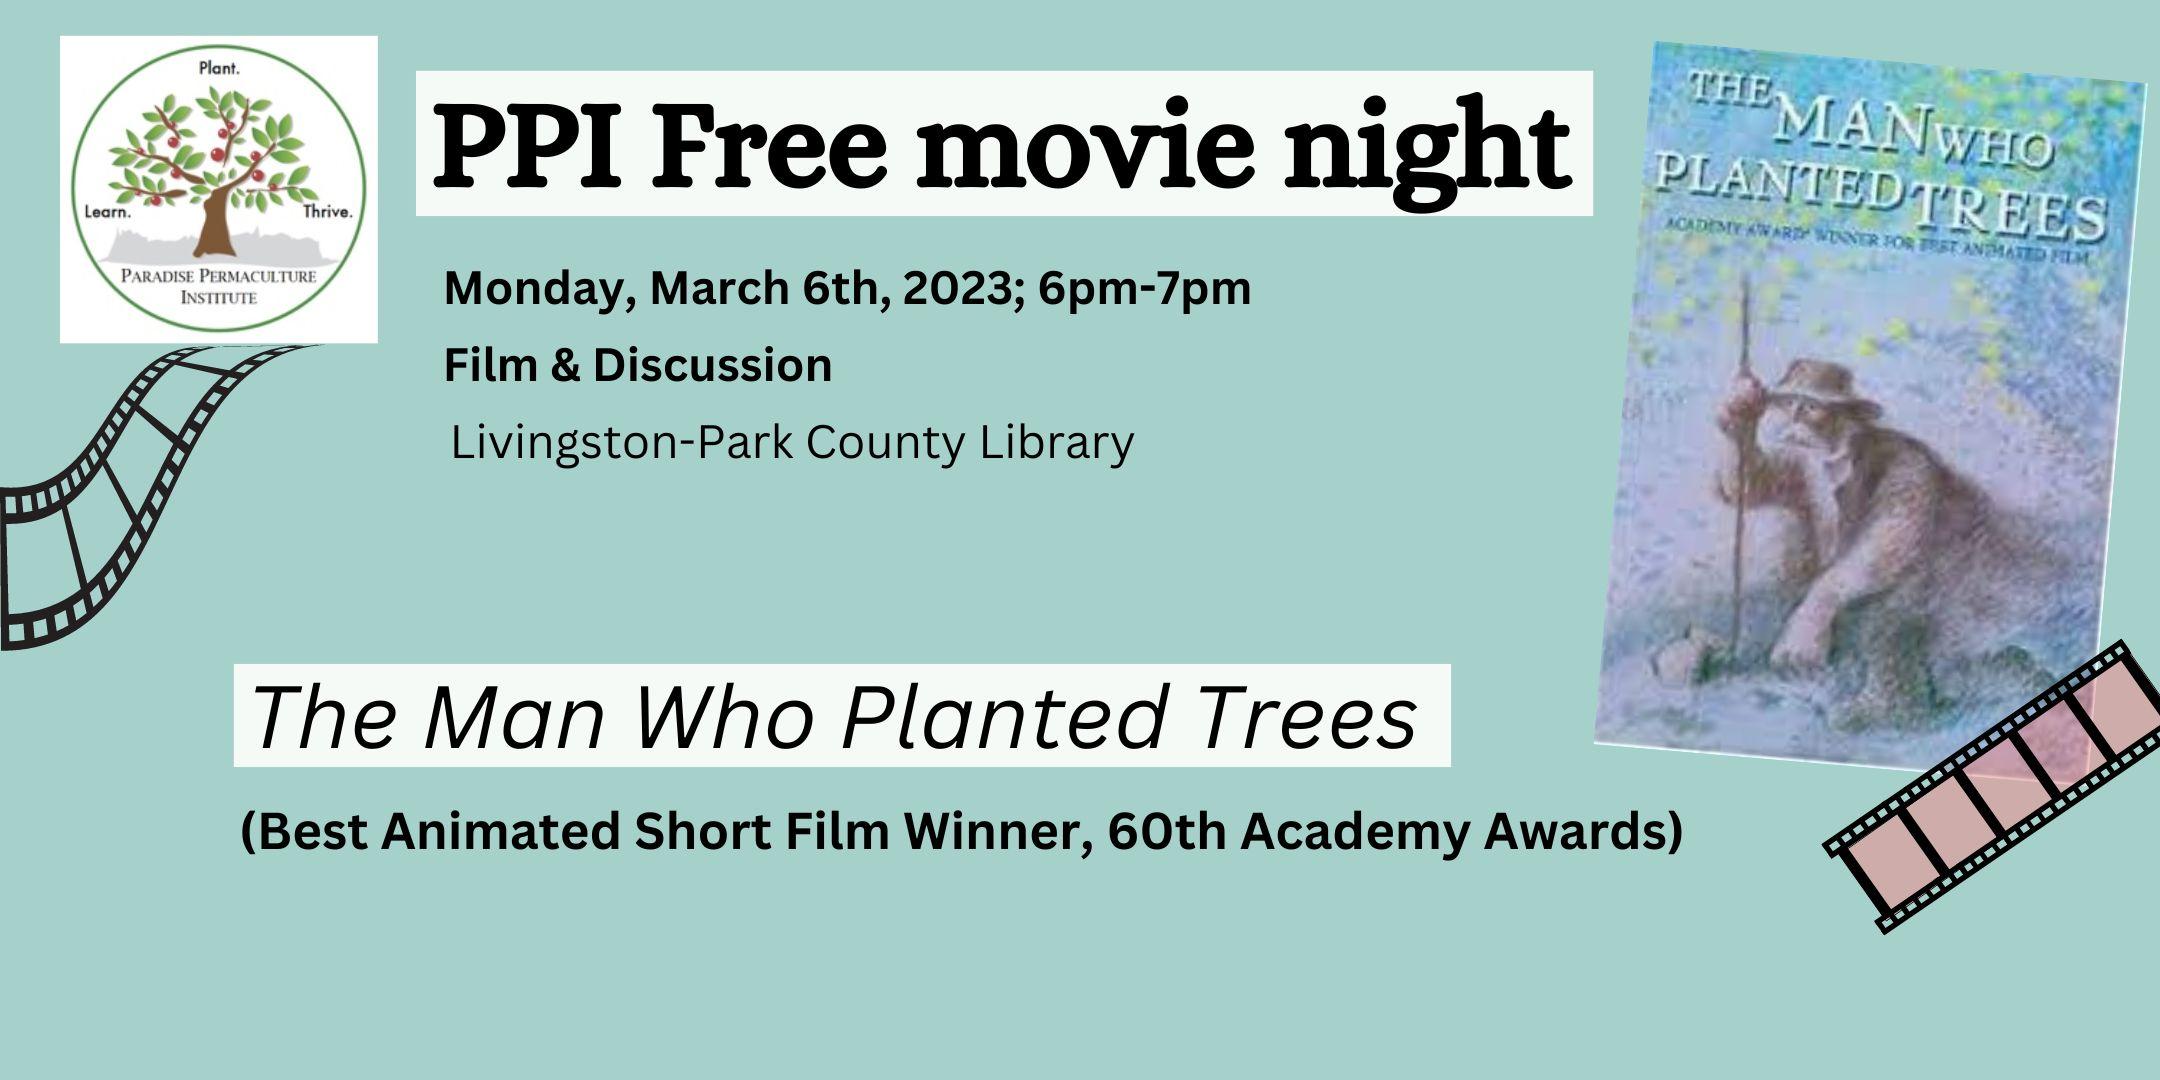 PPI Free movie night: The Man Who Planted Trees